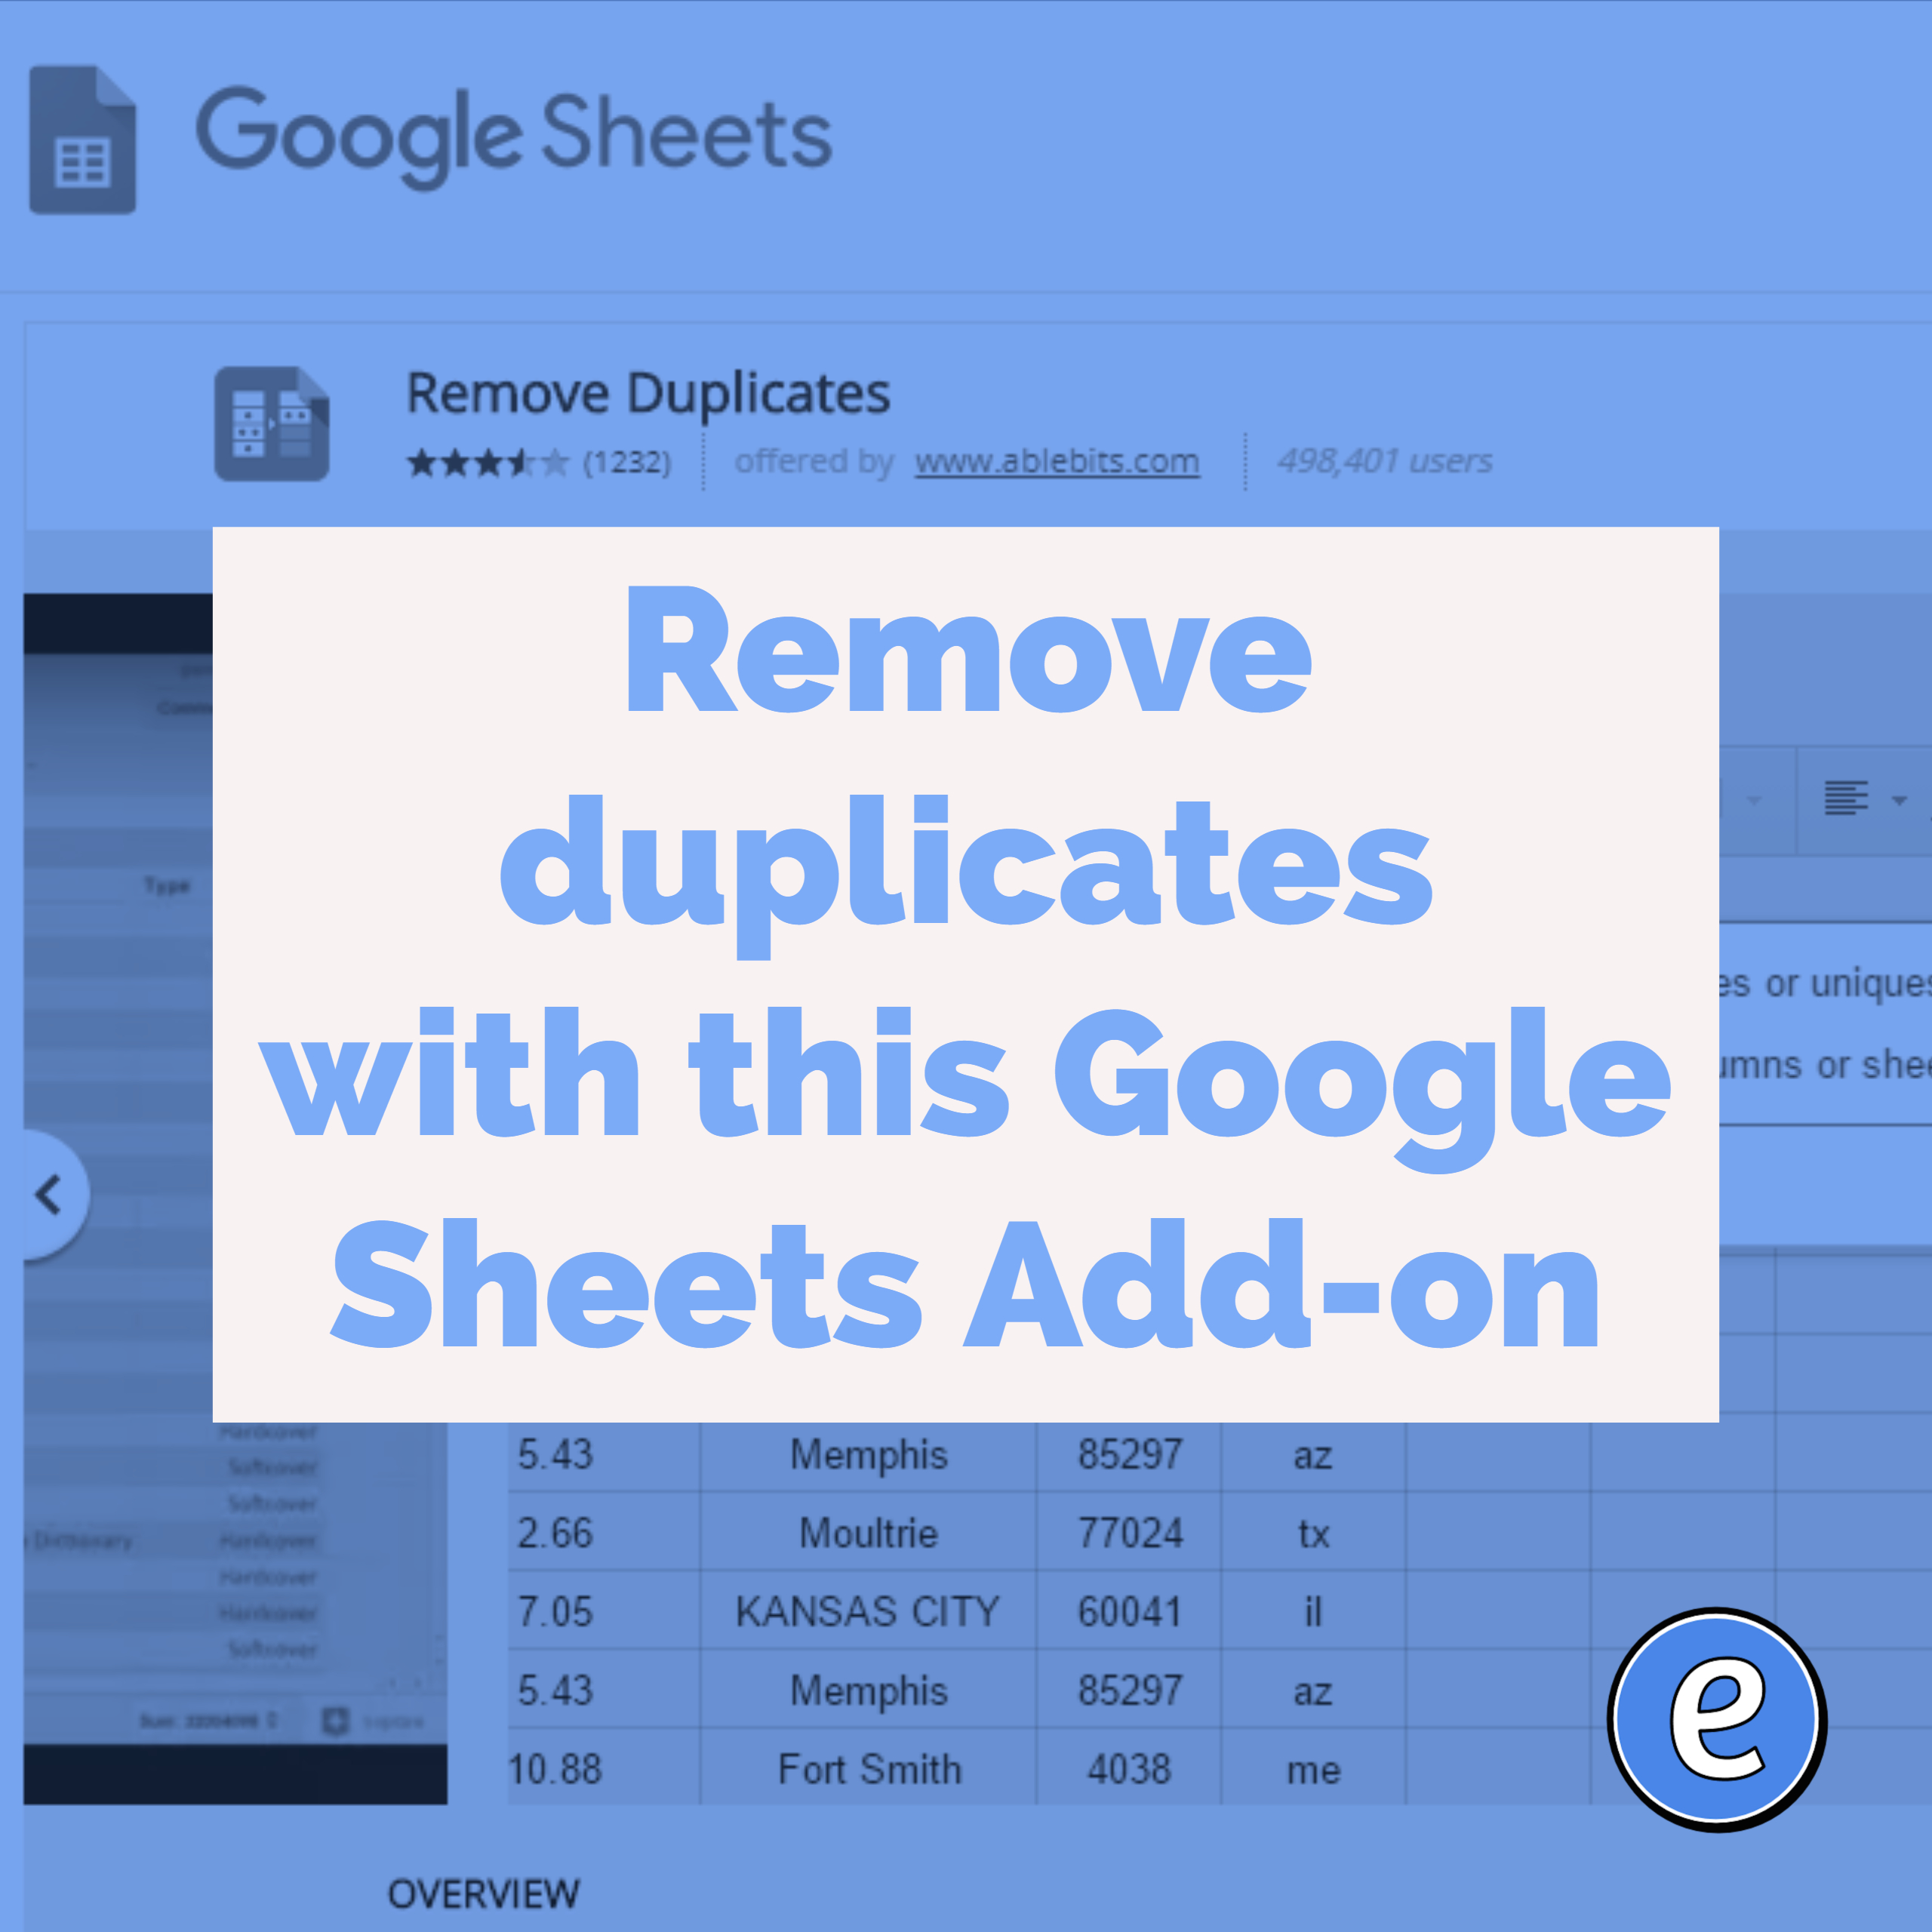 Remove duplicates with this Google Sheets Add-on